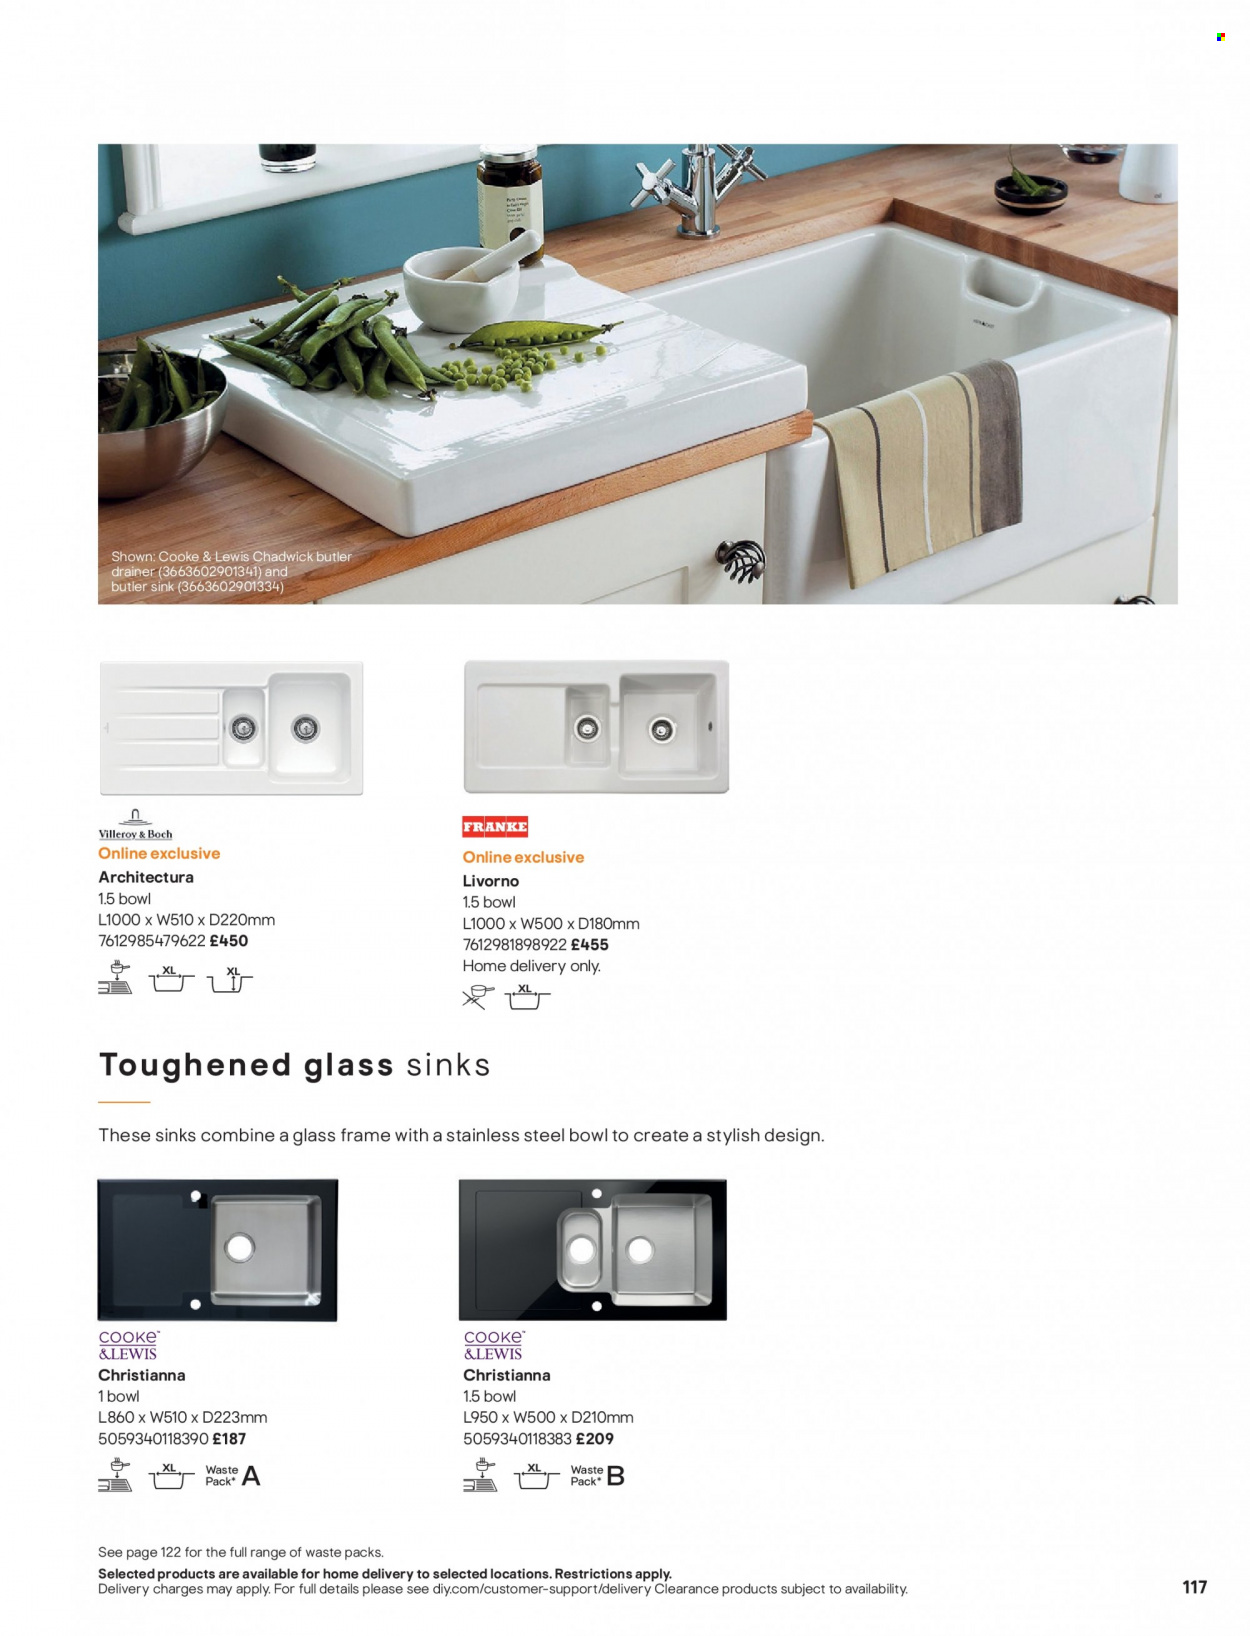 thumbnail - B&Q offer  - Sales products - sink. Page 117.